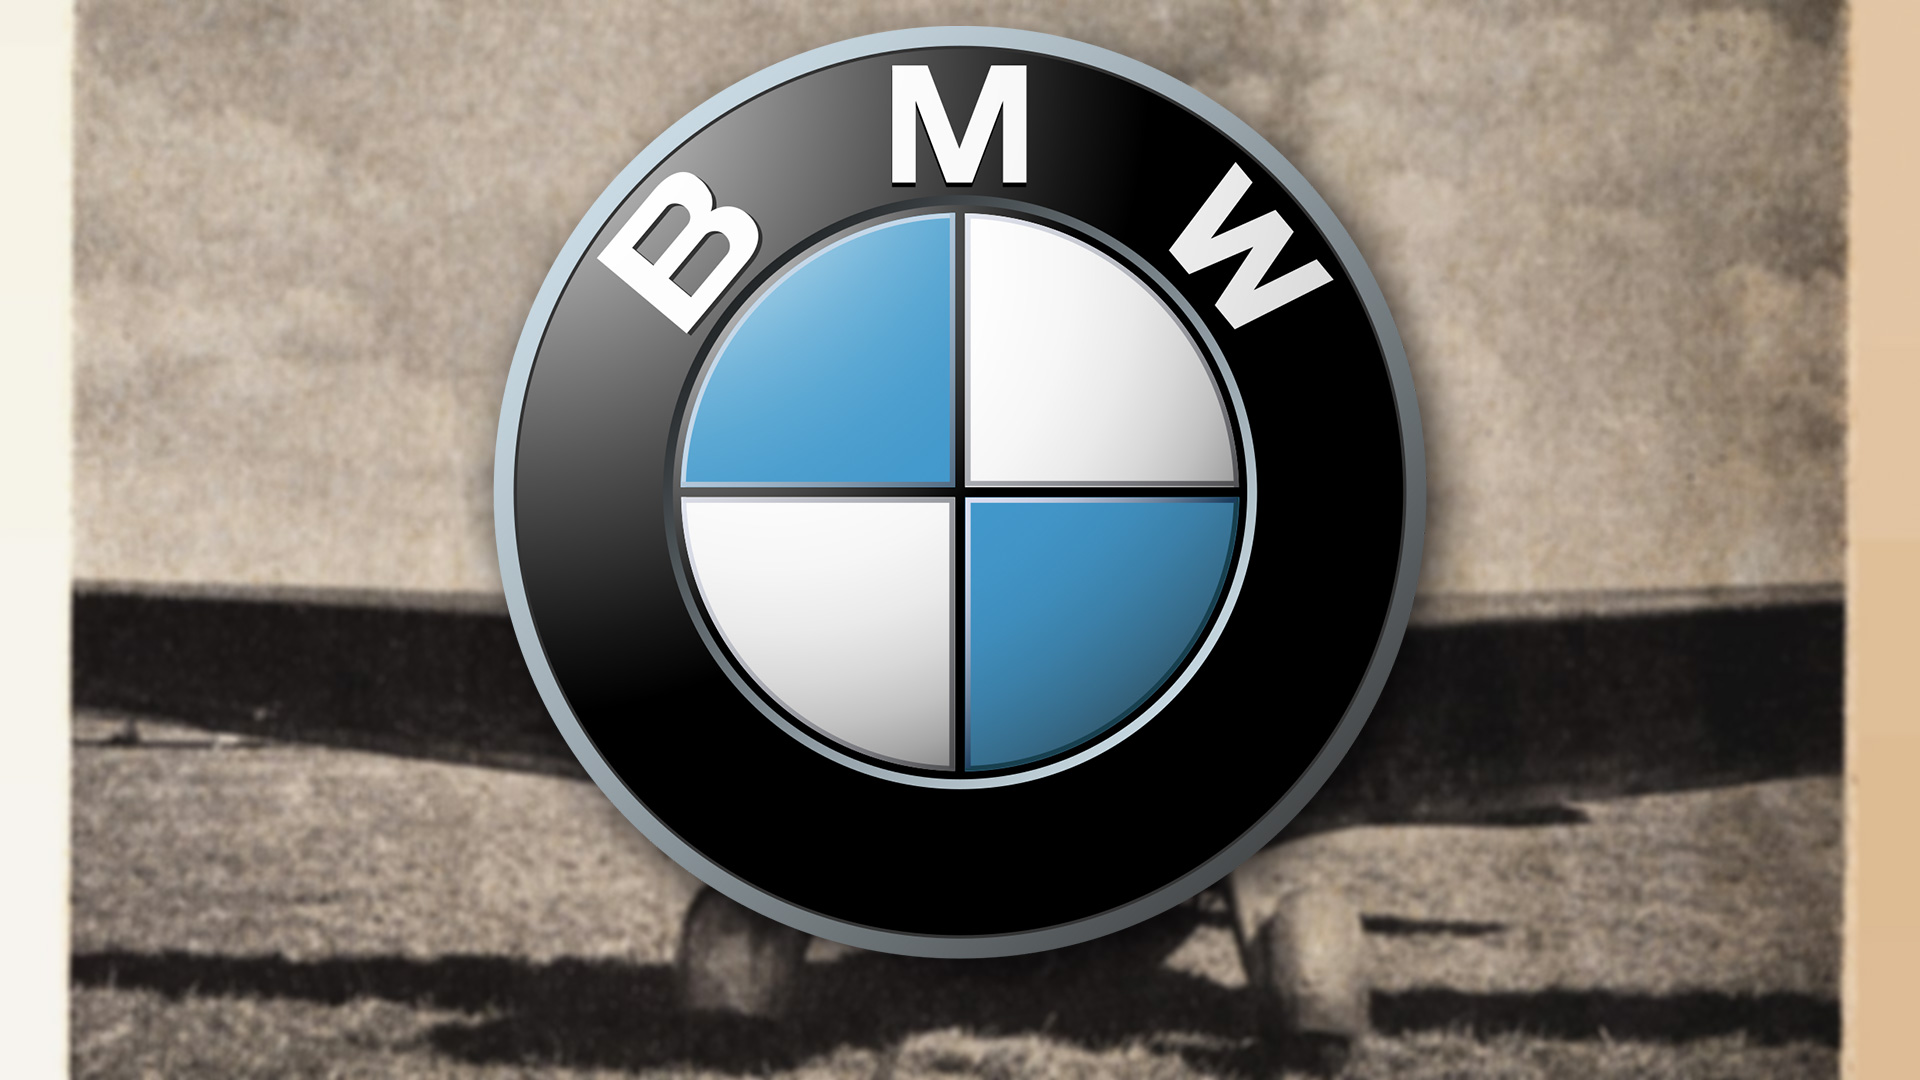 Here's How The BMW Logo Evolved Through The Years